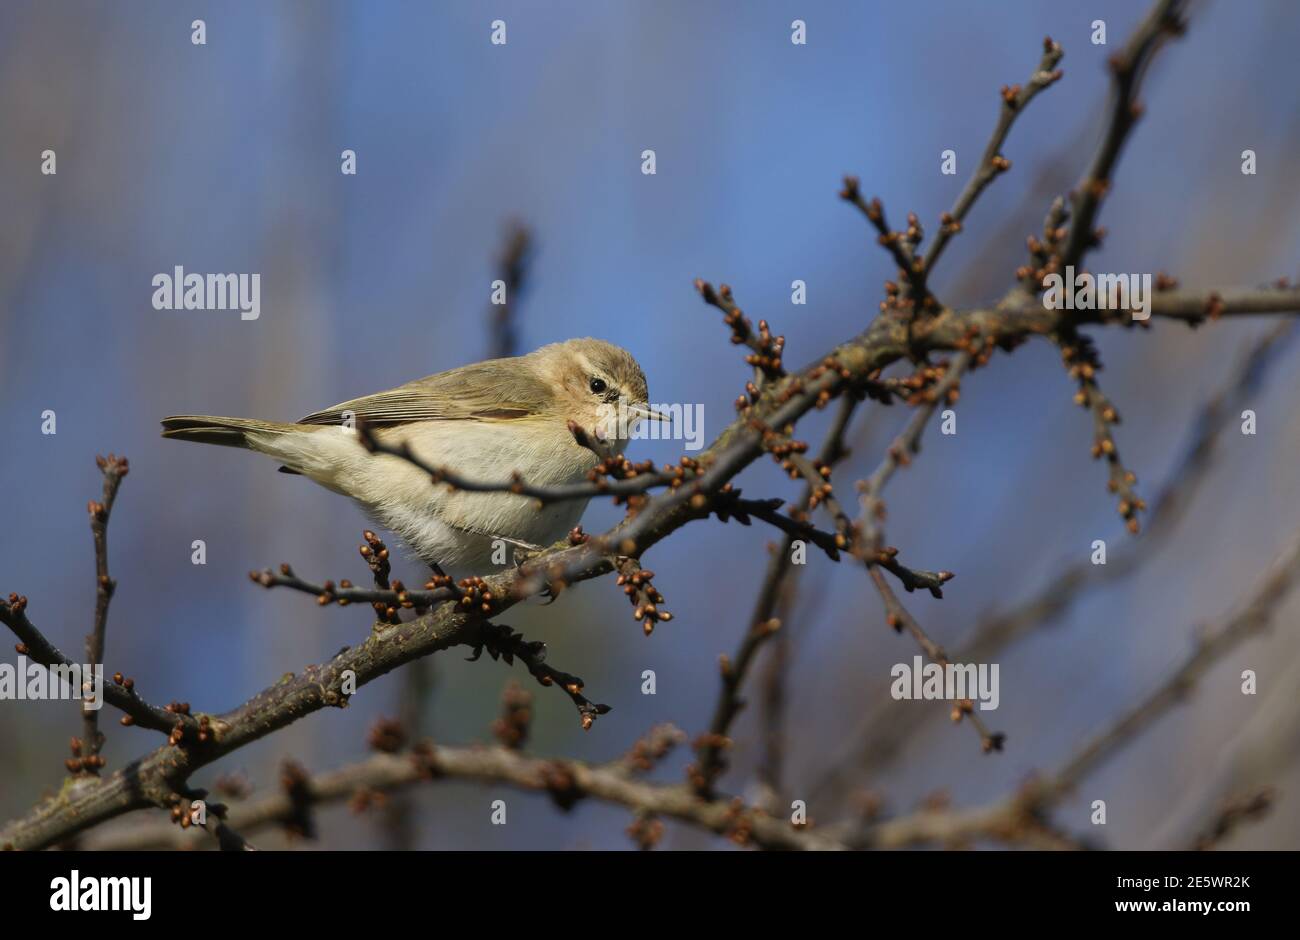 A Siberian Chiffchaff, Phylloscopus collybita tristis, perched on a branch of a tree in winter. Stock Photo